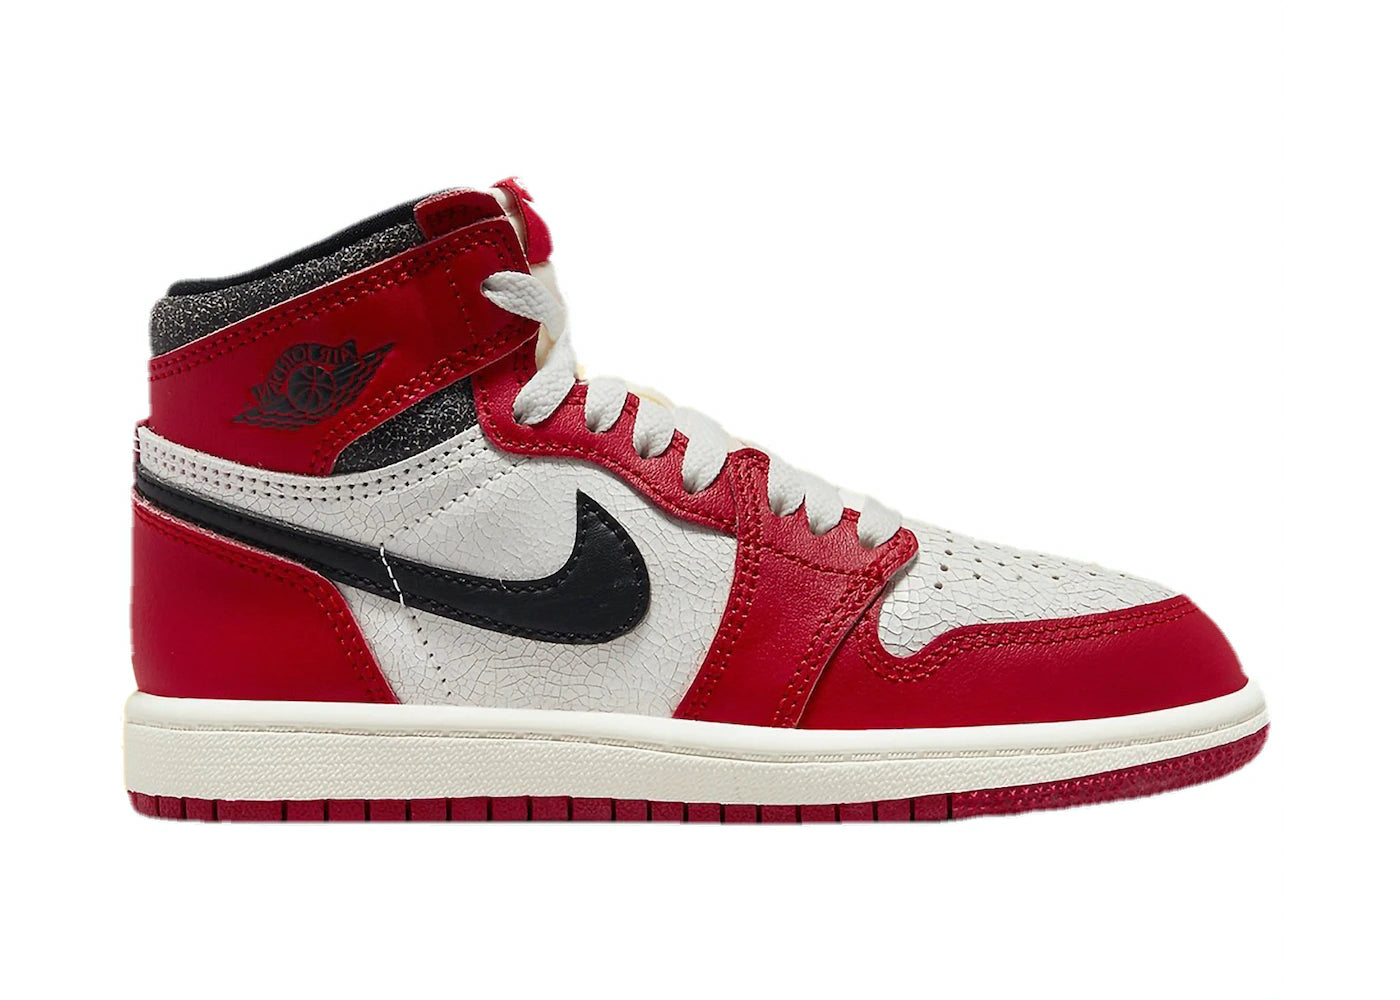 Jordan 1 Retro High OG Chicago Lost and Found (PS) – Sole Priorities